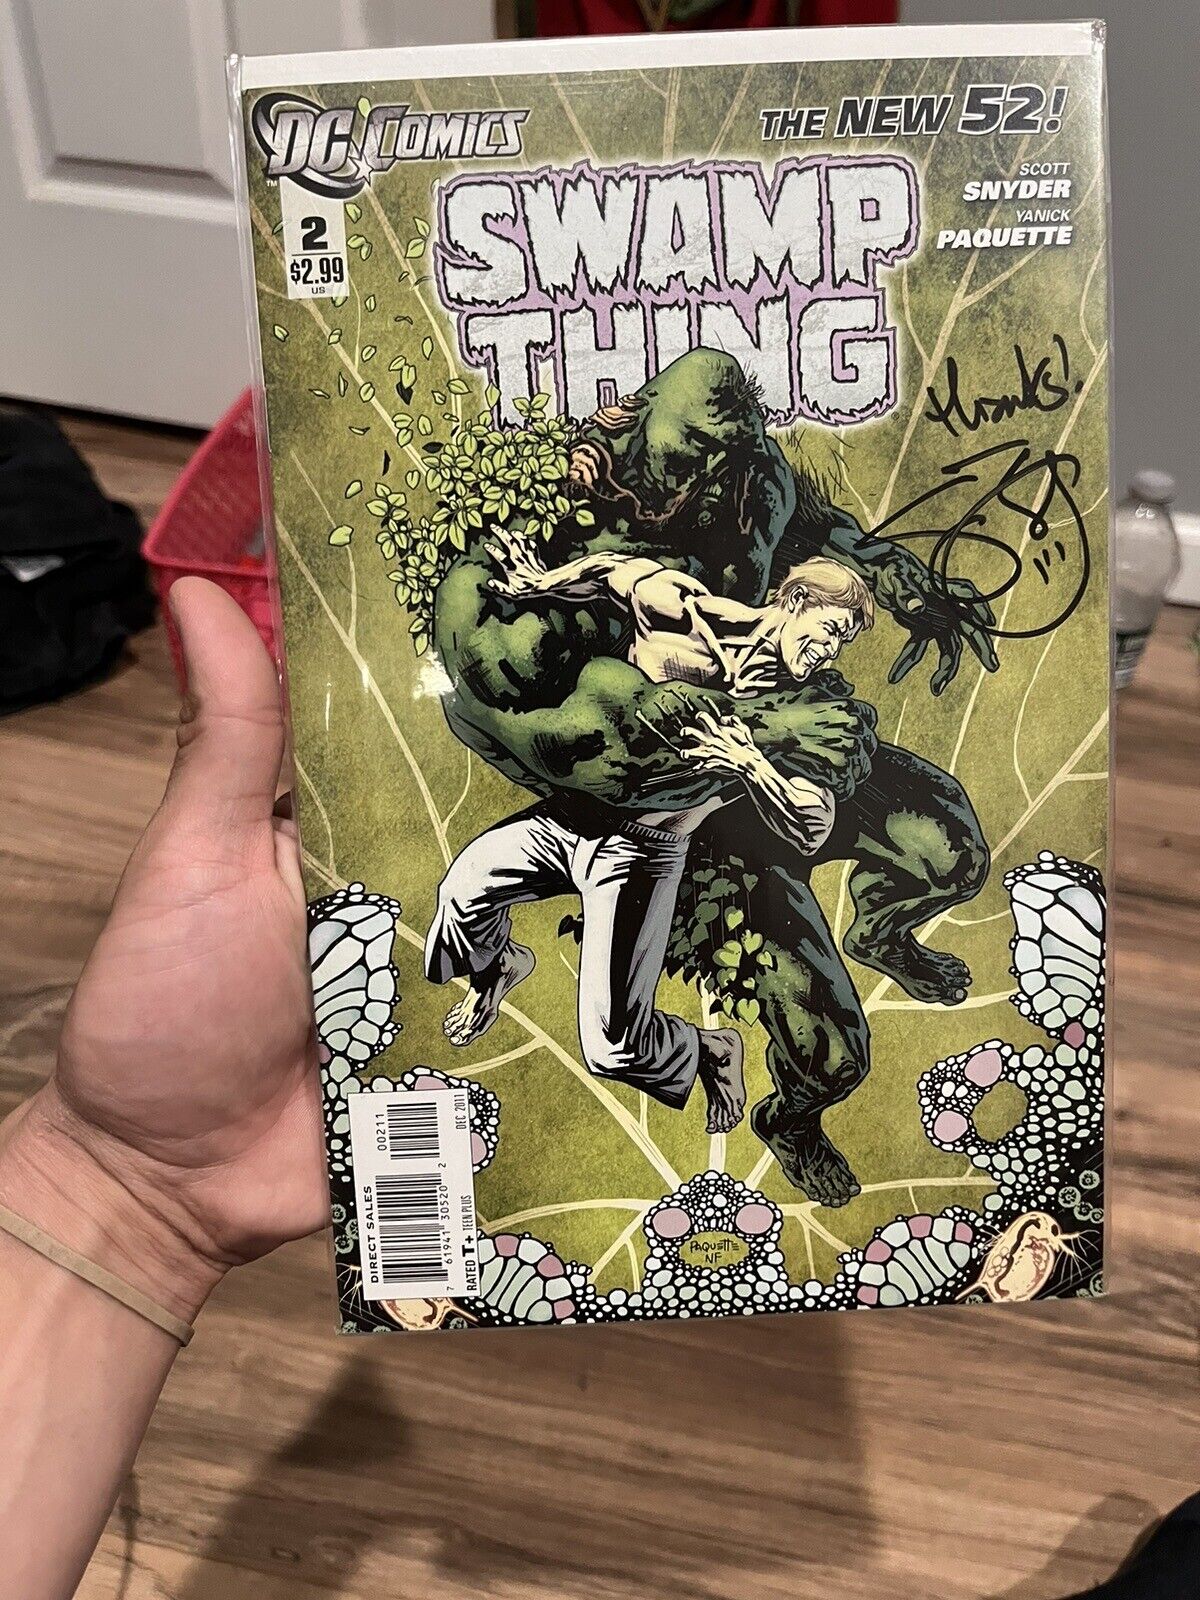 Swamp Thing #2 New 52 (DC, 2011) SIGNED by Scott Synder Rare